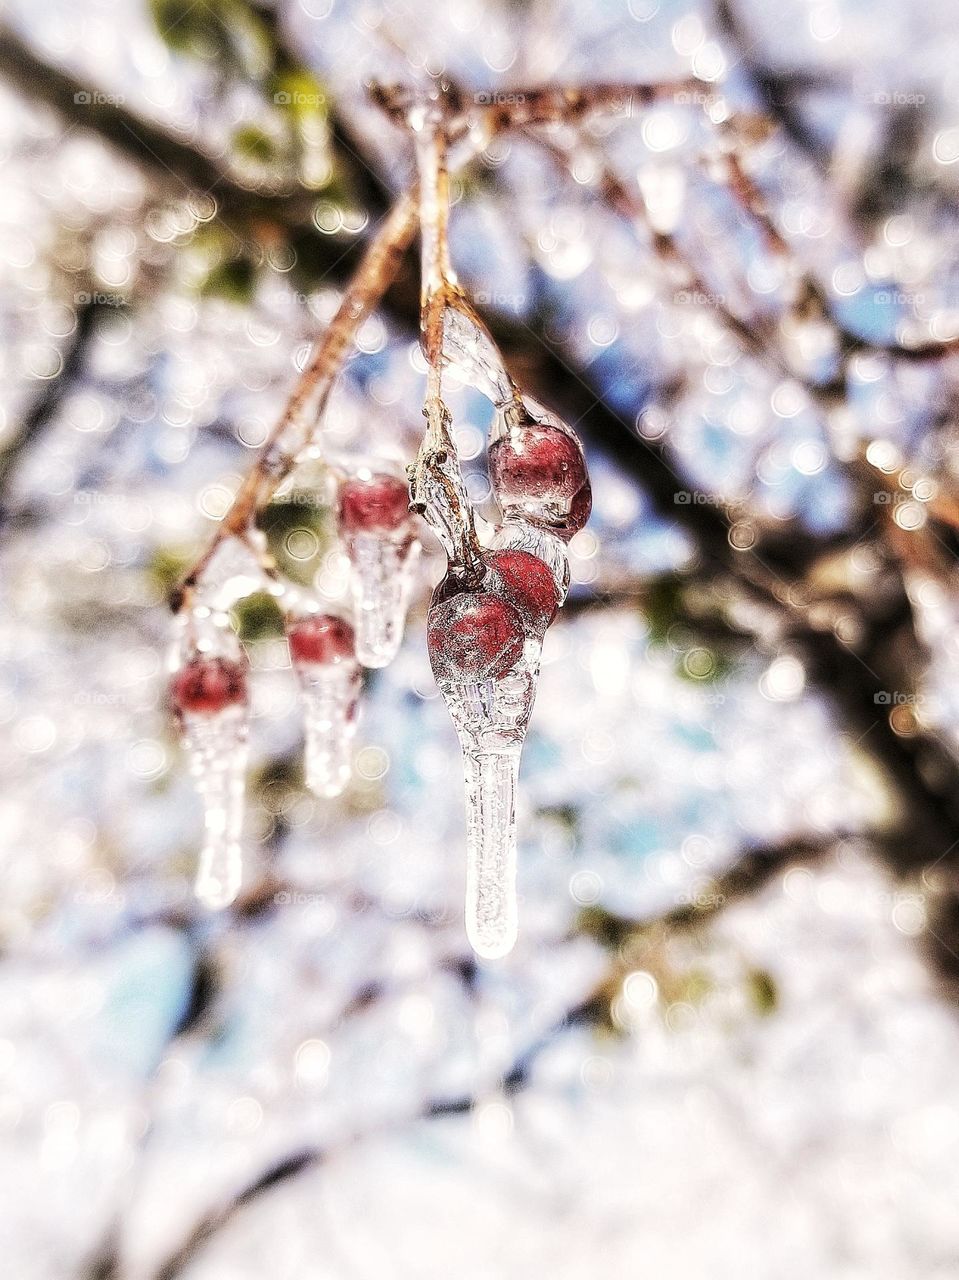 Icy Berries on a Tree